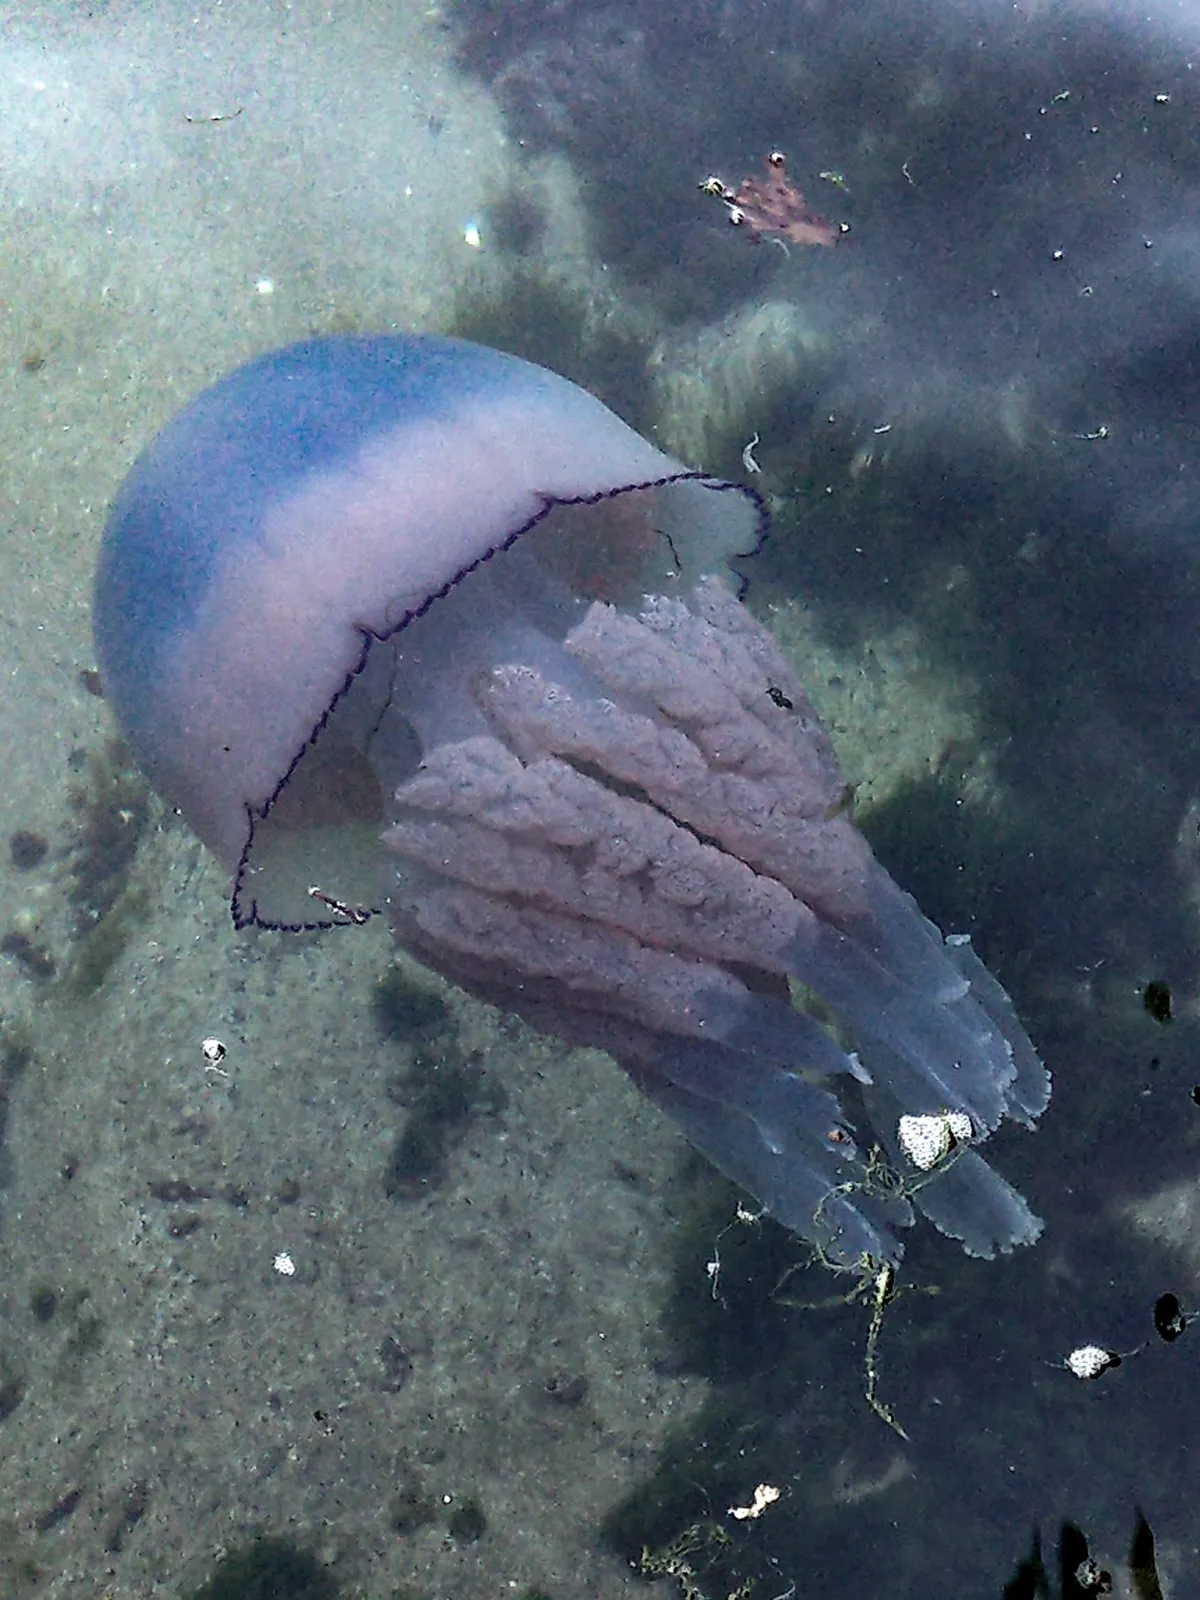 A large barrel jellyfish in the sea